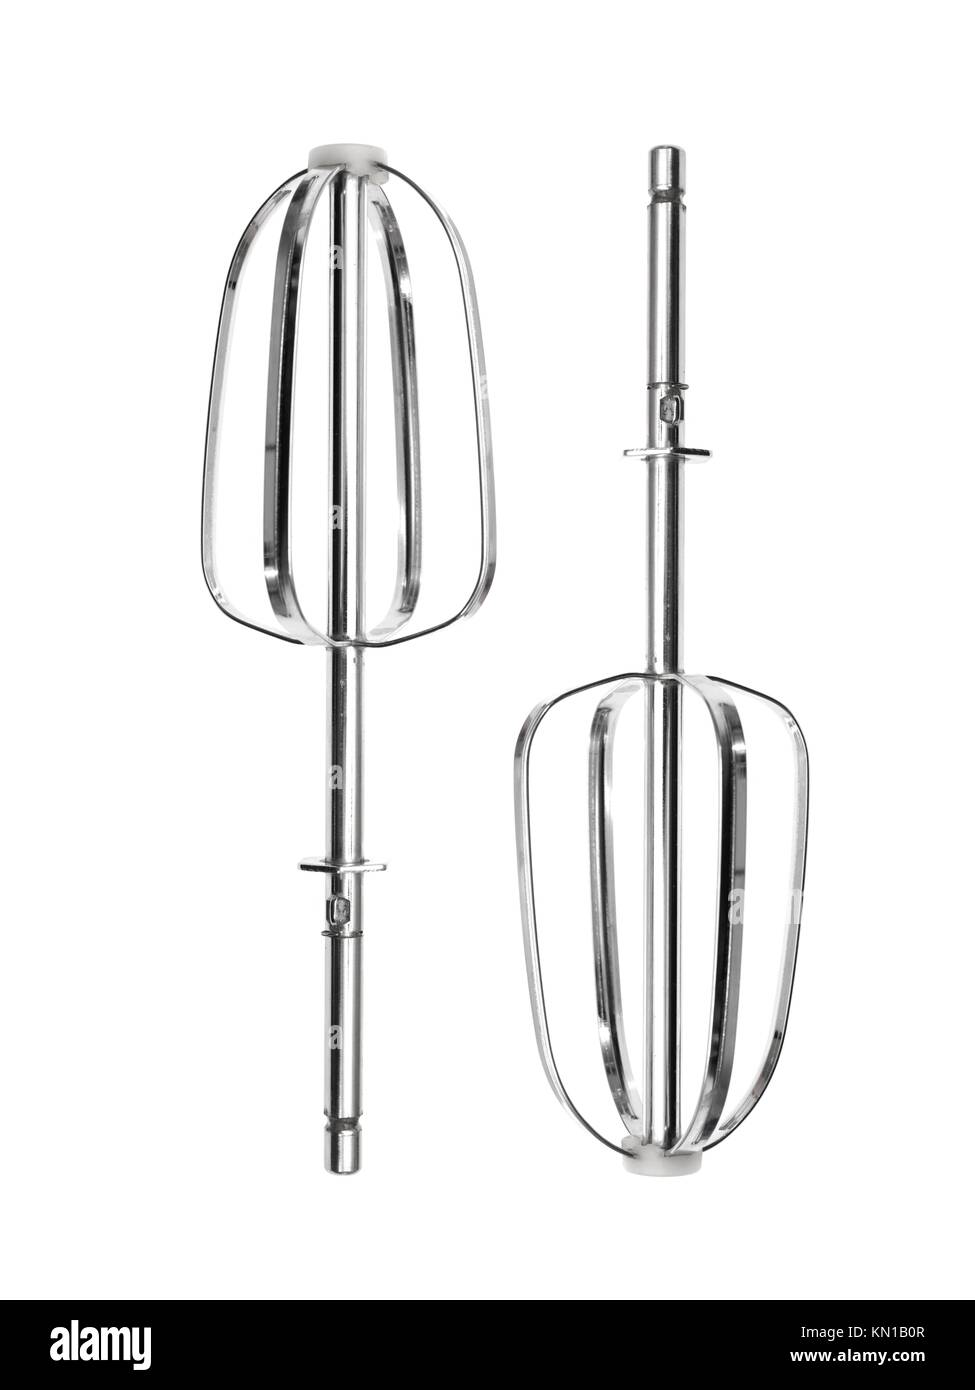 https://c8.alamy.com/comp/KN1B0R/electric-egg-beater-attachments-isolated-on-white-KN1B0R.jpg